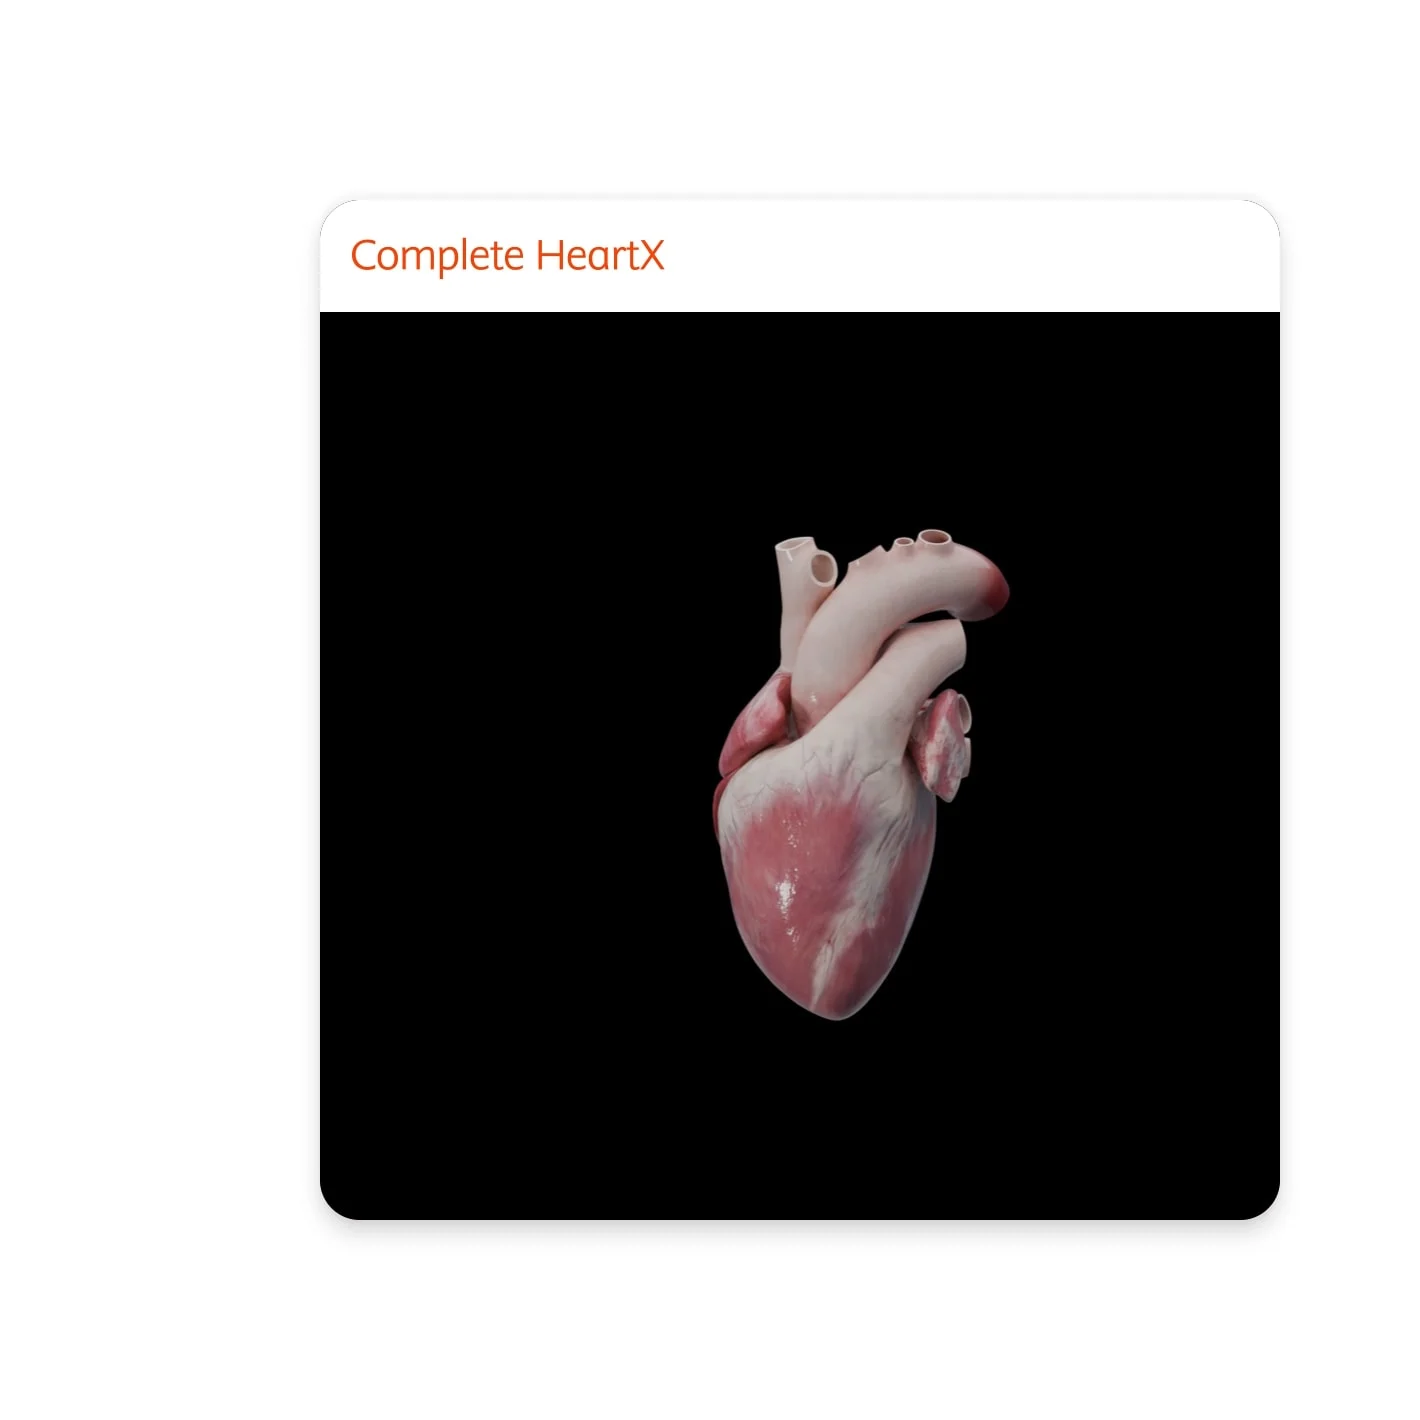 Features and screenshots of Complete HeartX